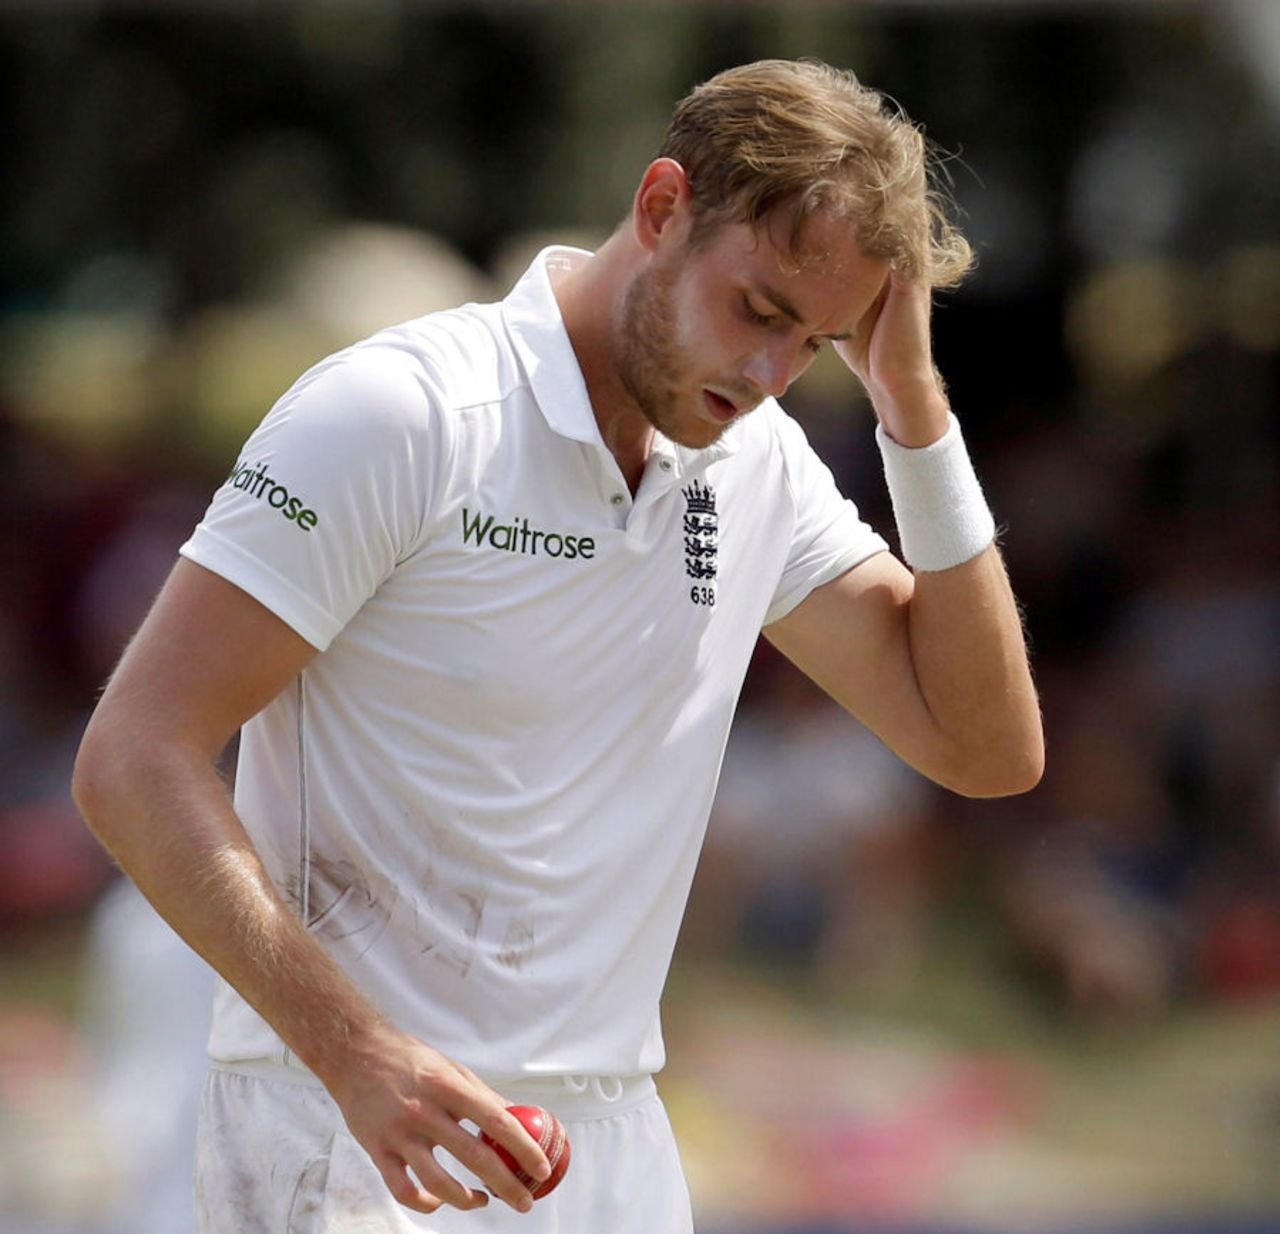 Stuart Broad's new-ball spell went unrewarded, South Africa v England, 1st Test, Durban, 4th day, December 29, 2015